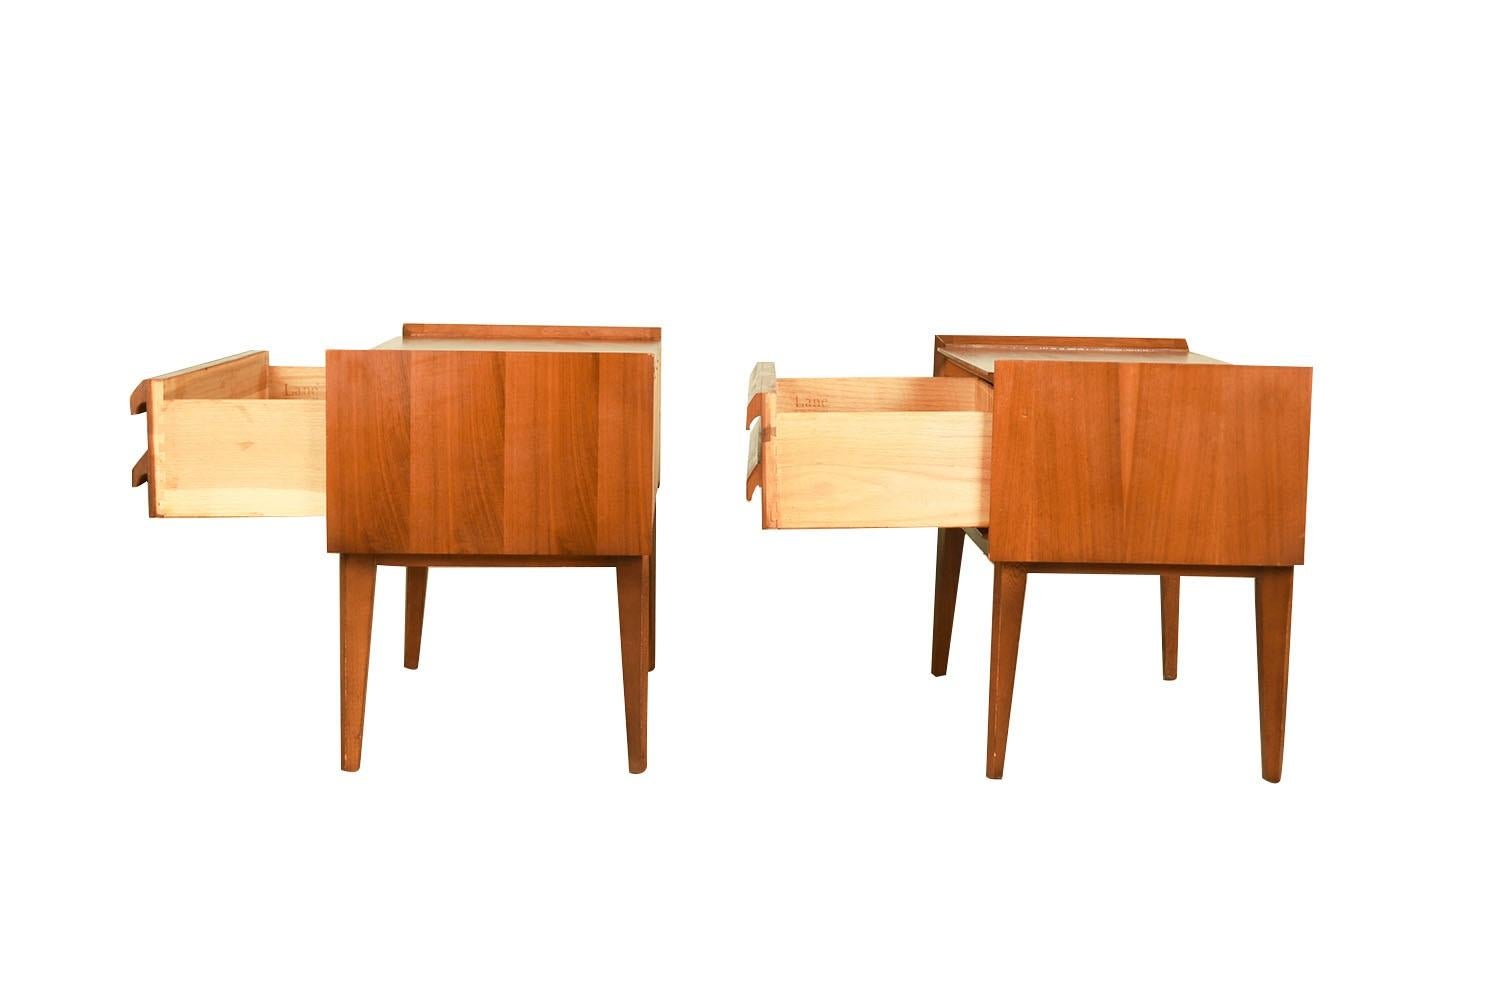 American Mid-Century Lane Walnut Pair Nightstands End Tables First Edition Collection For Sale